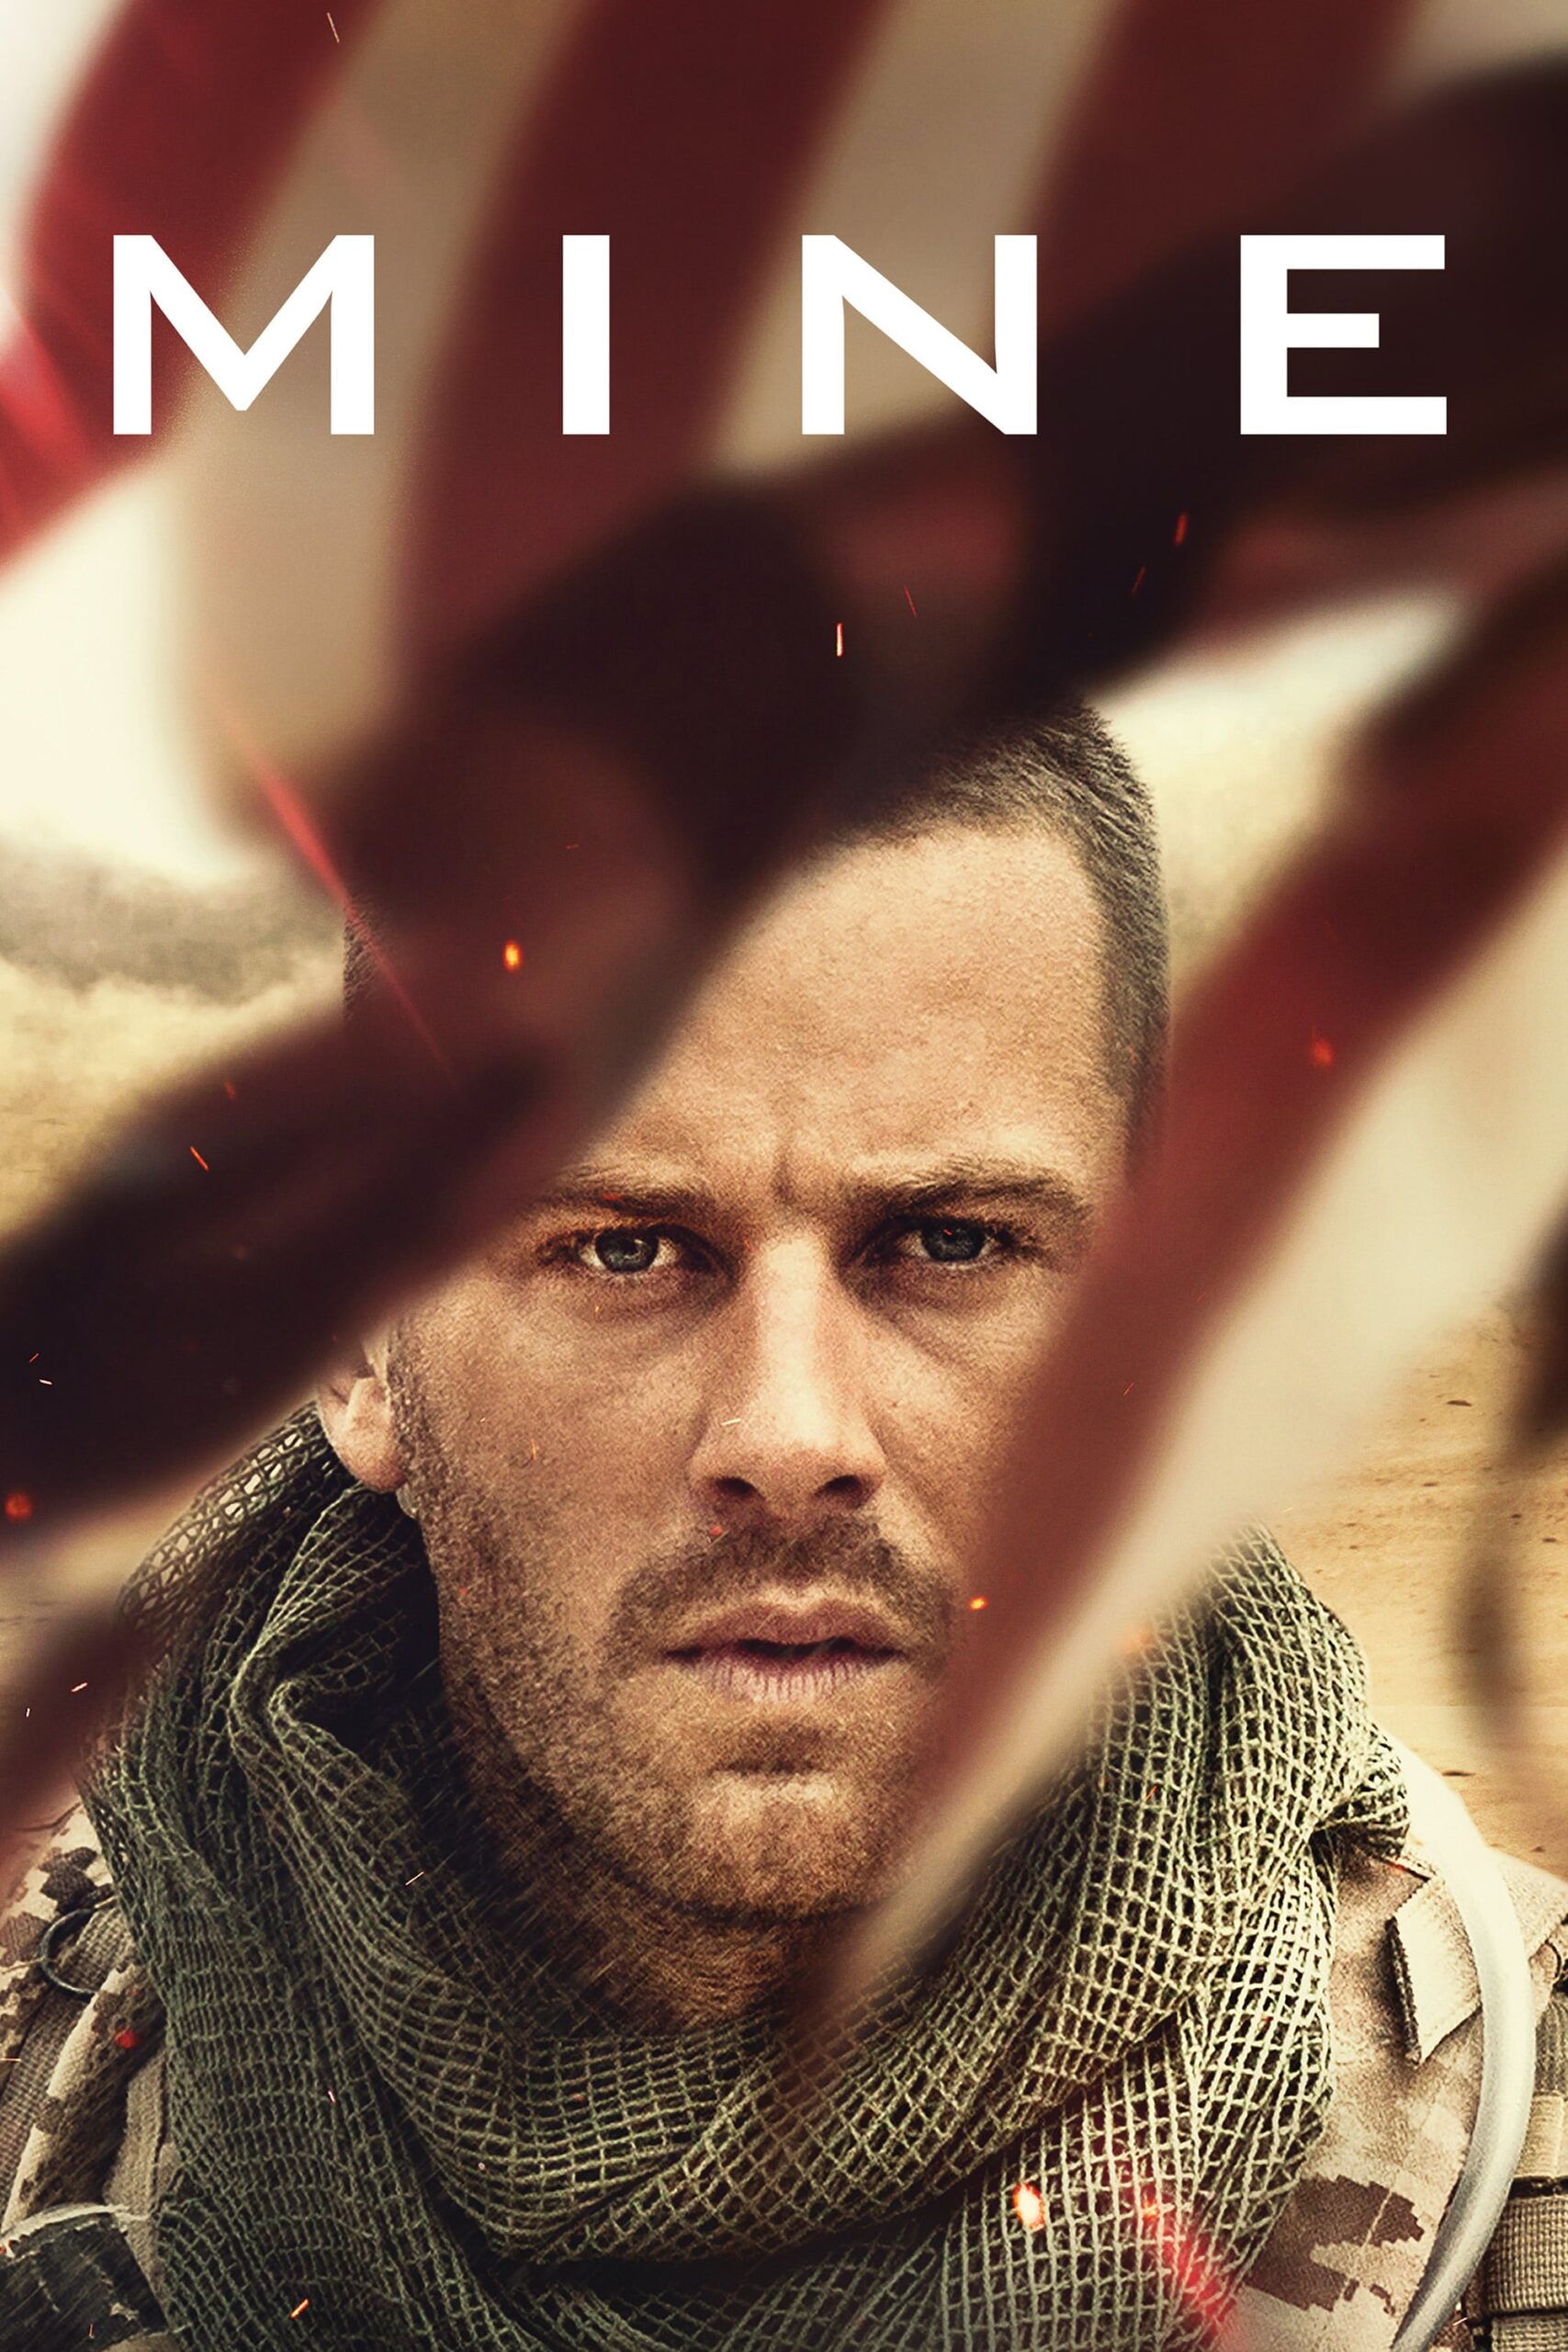 Poster for the movie "Mine"